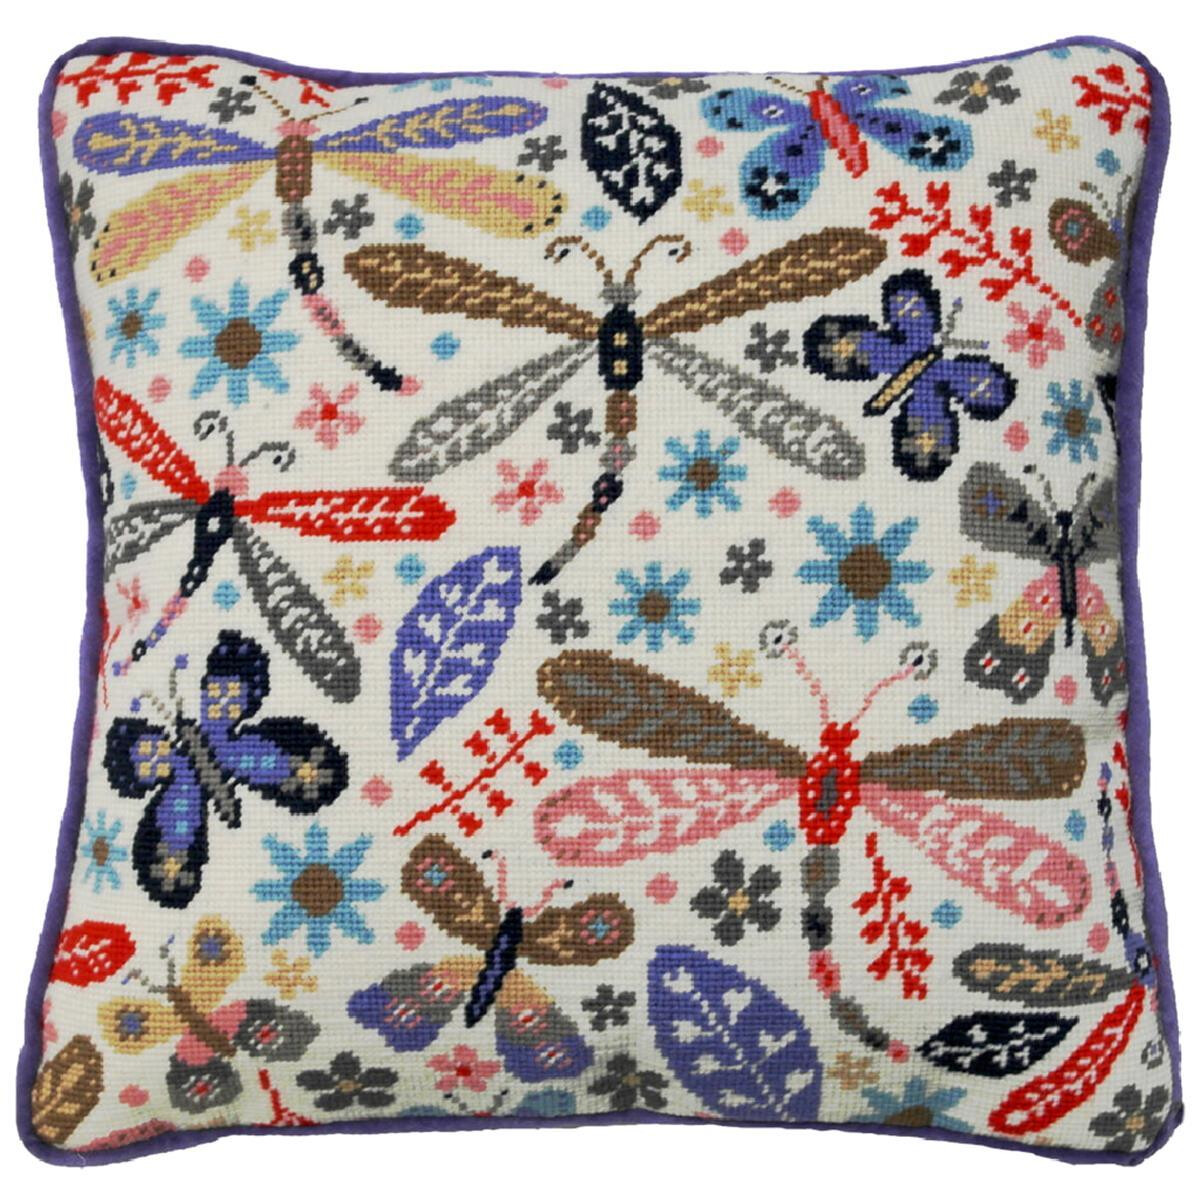 A square cushion with a colorful, detailed embroidery...